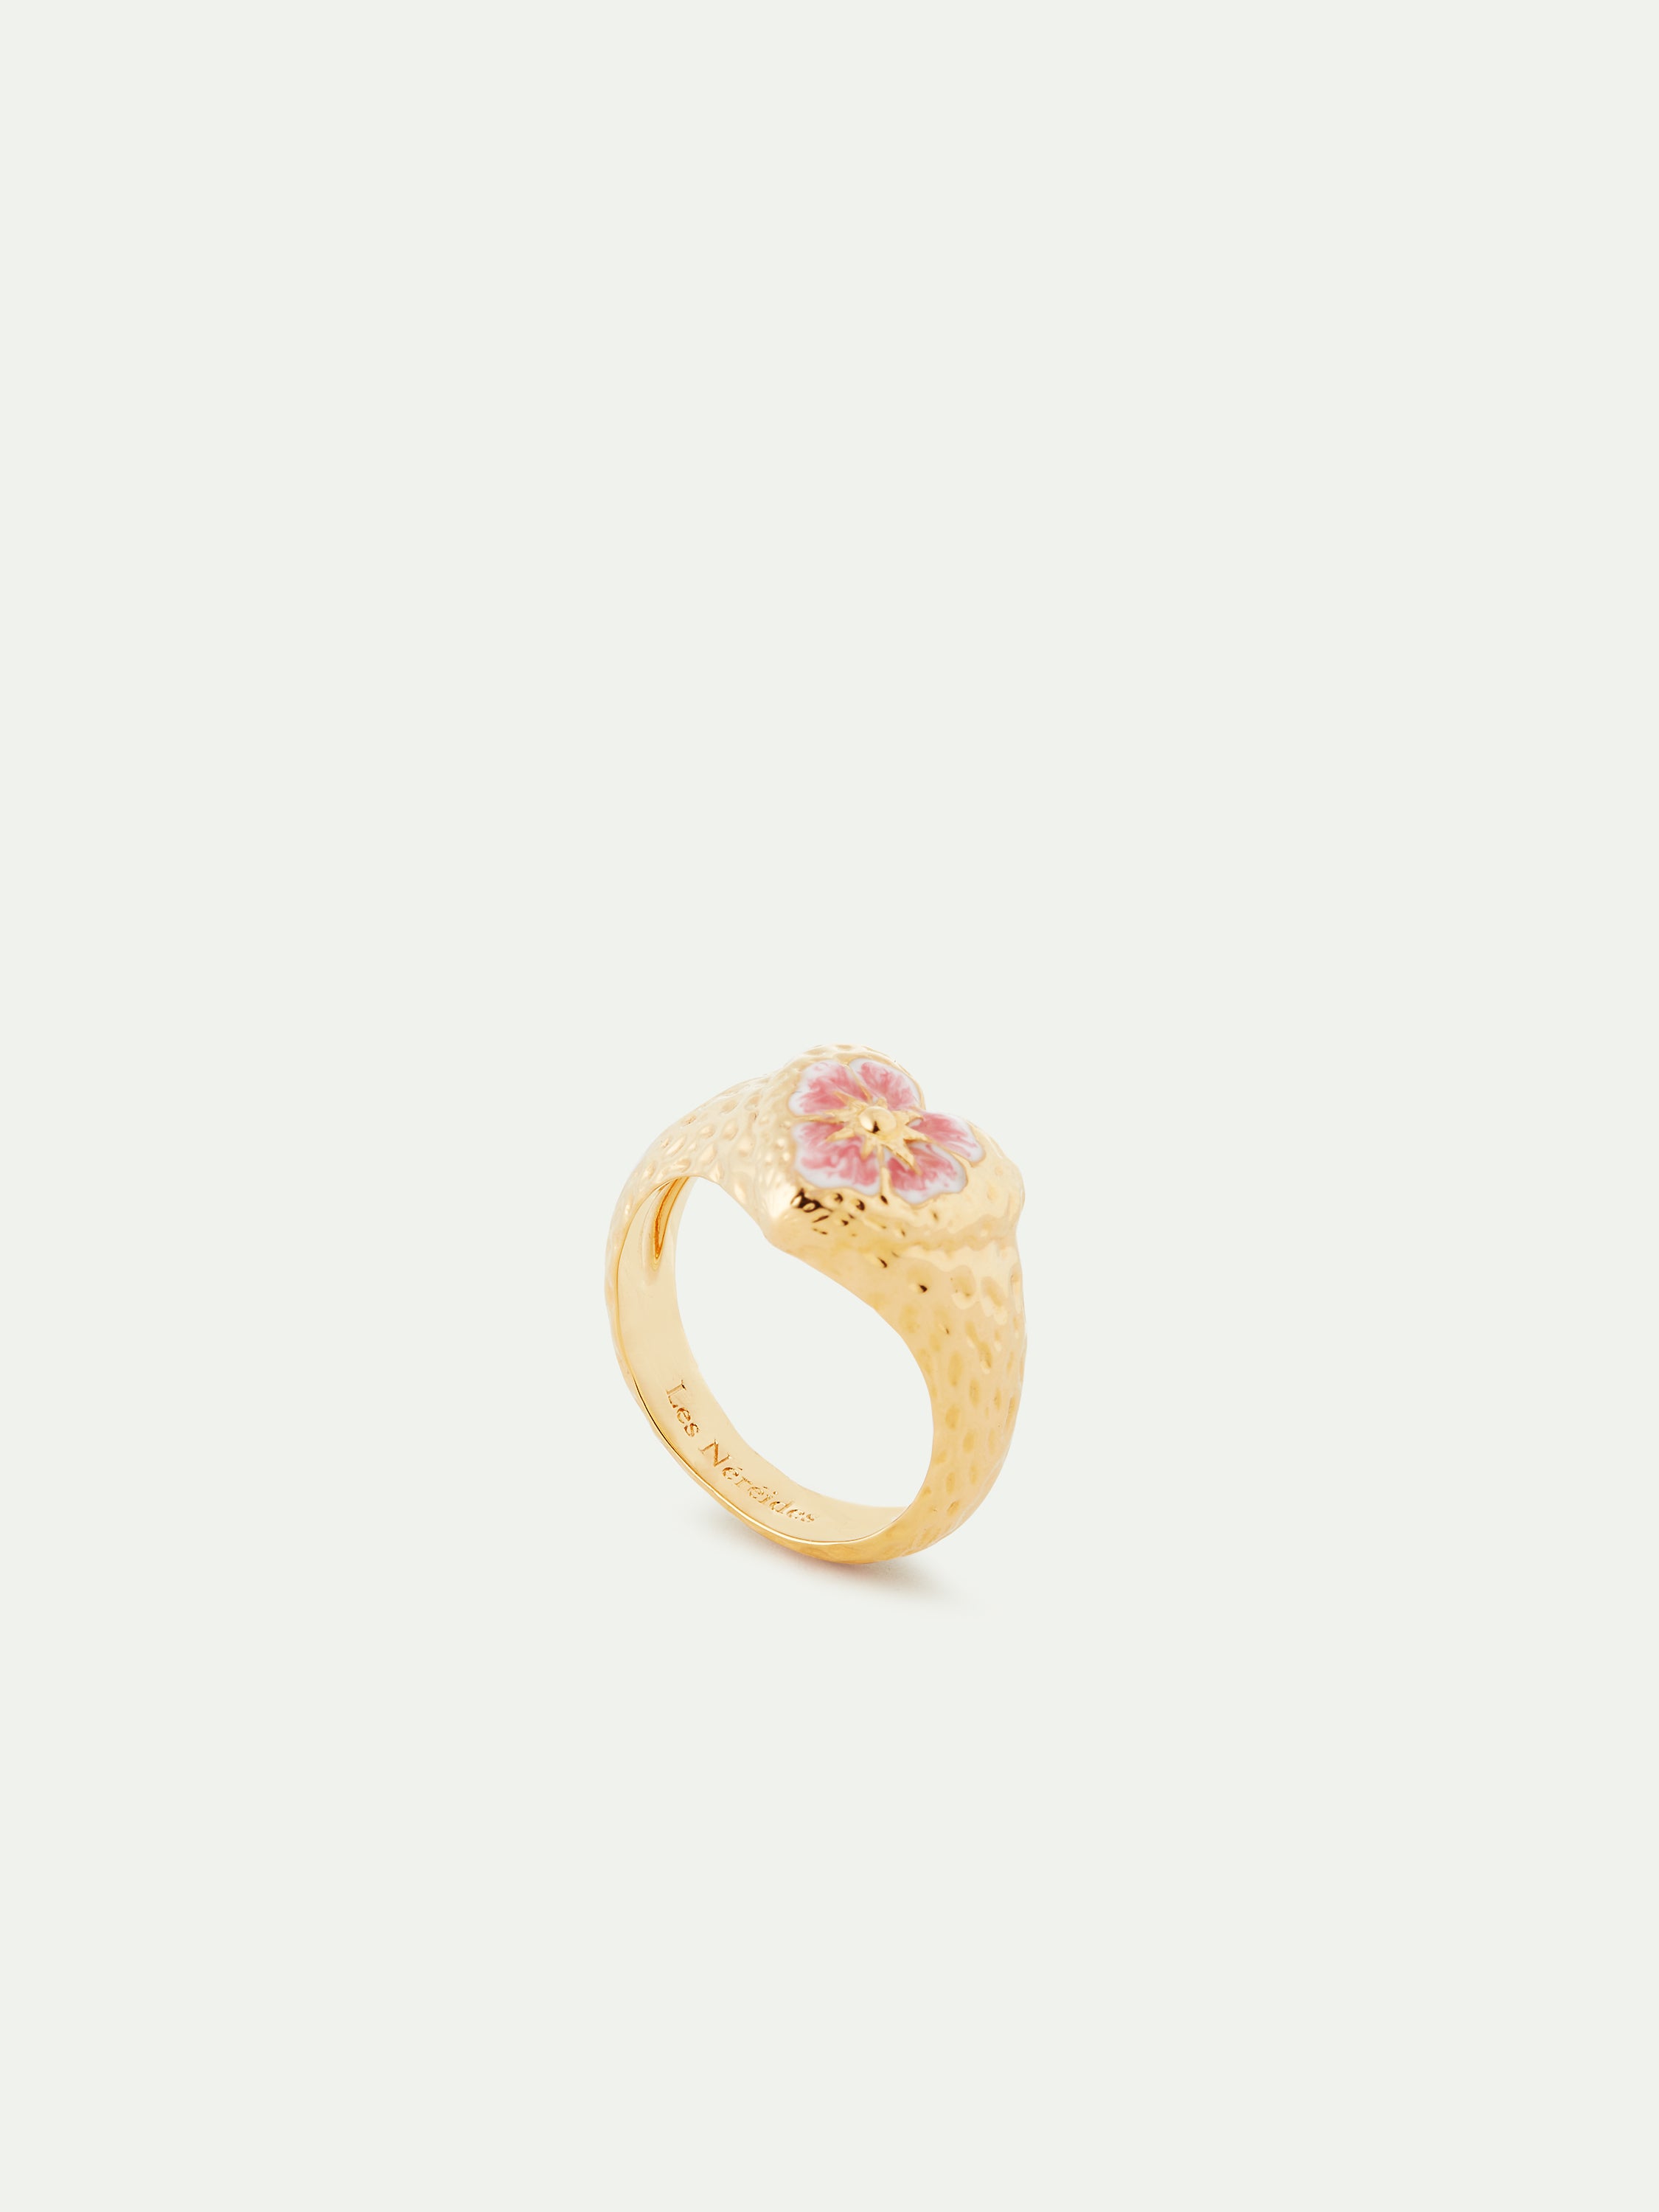 Heart and pansy flower cocktail ring